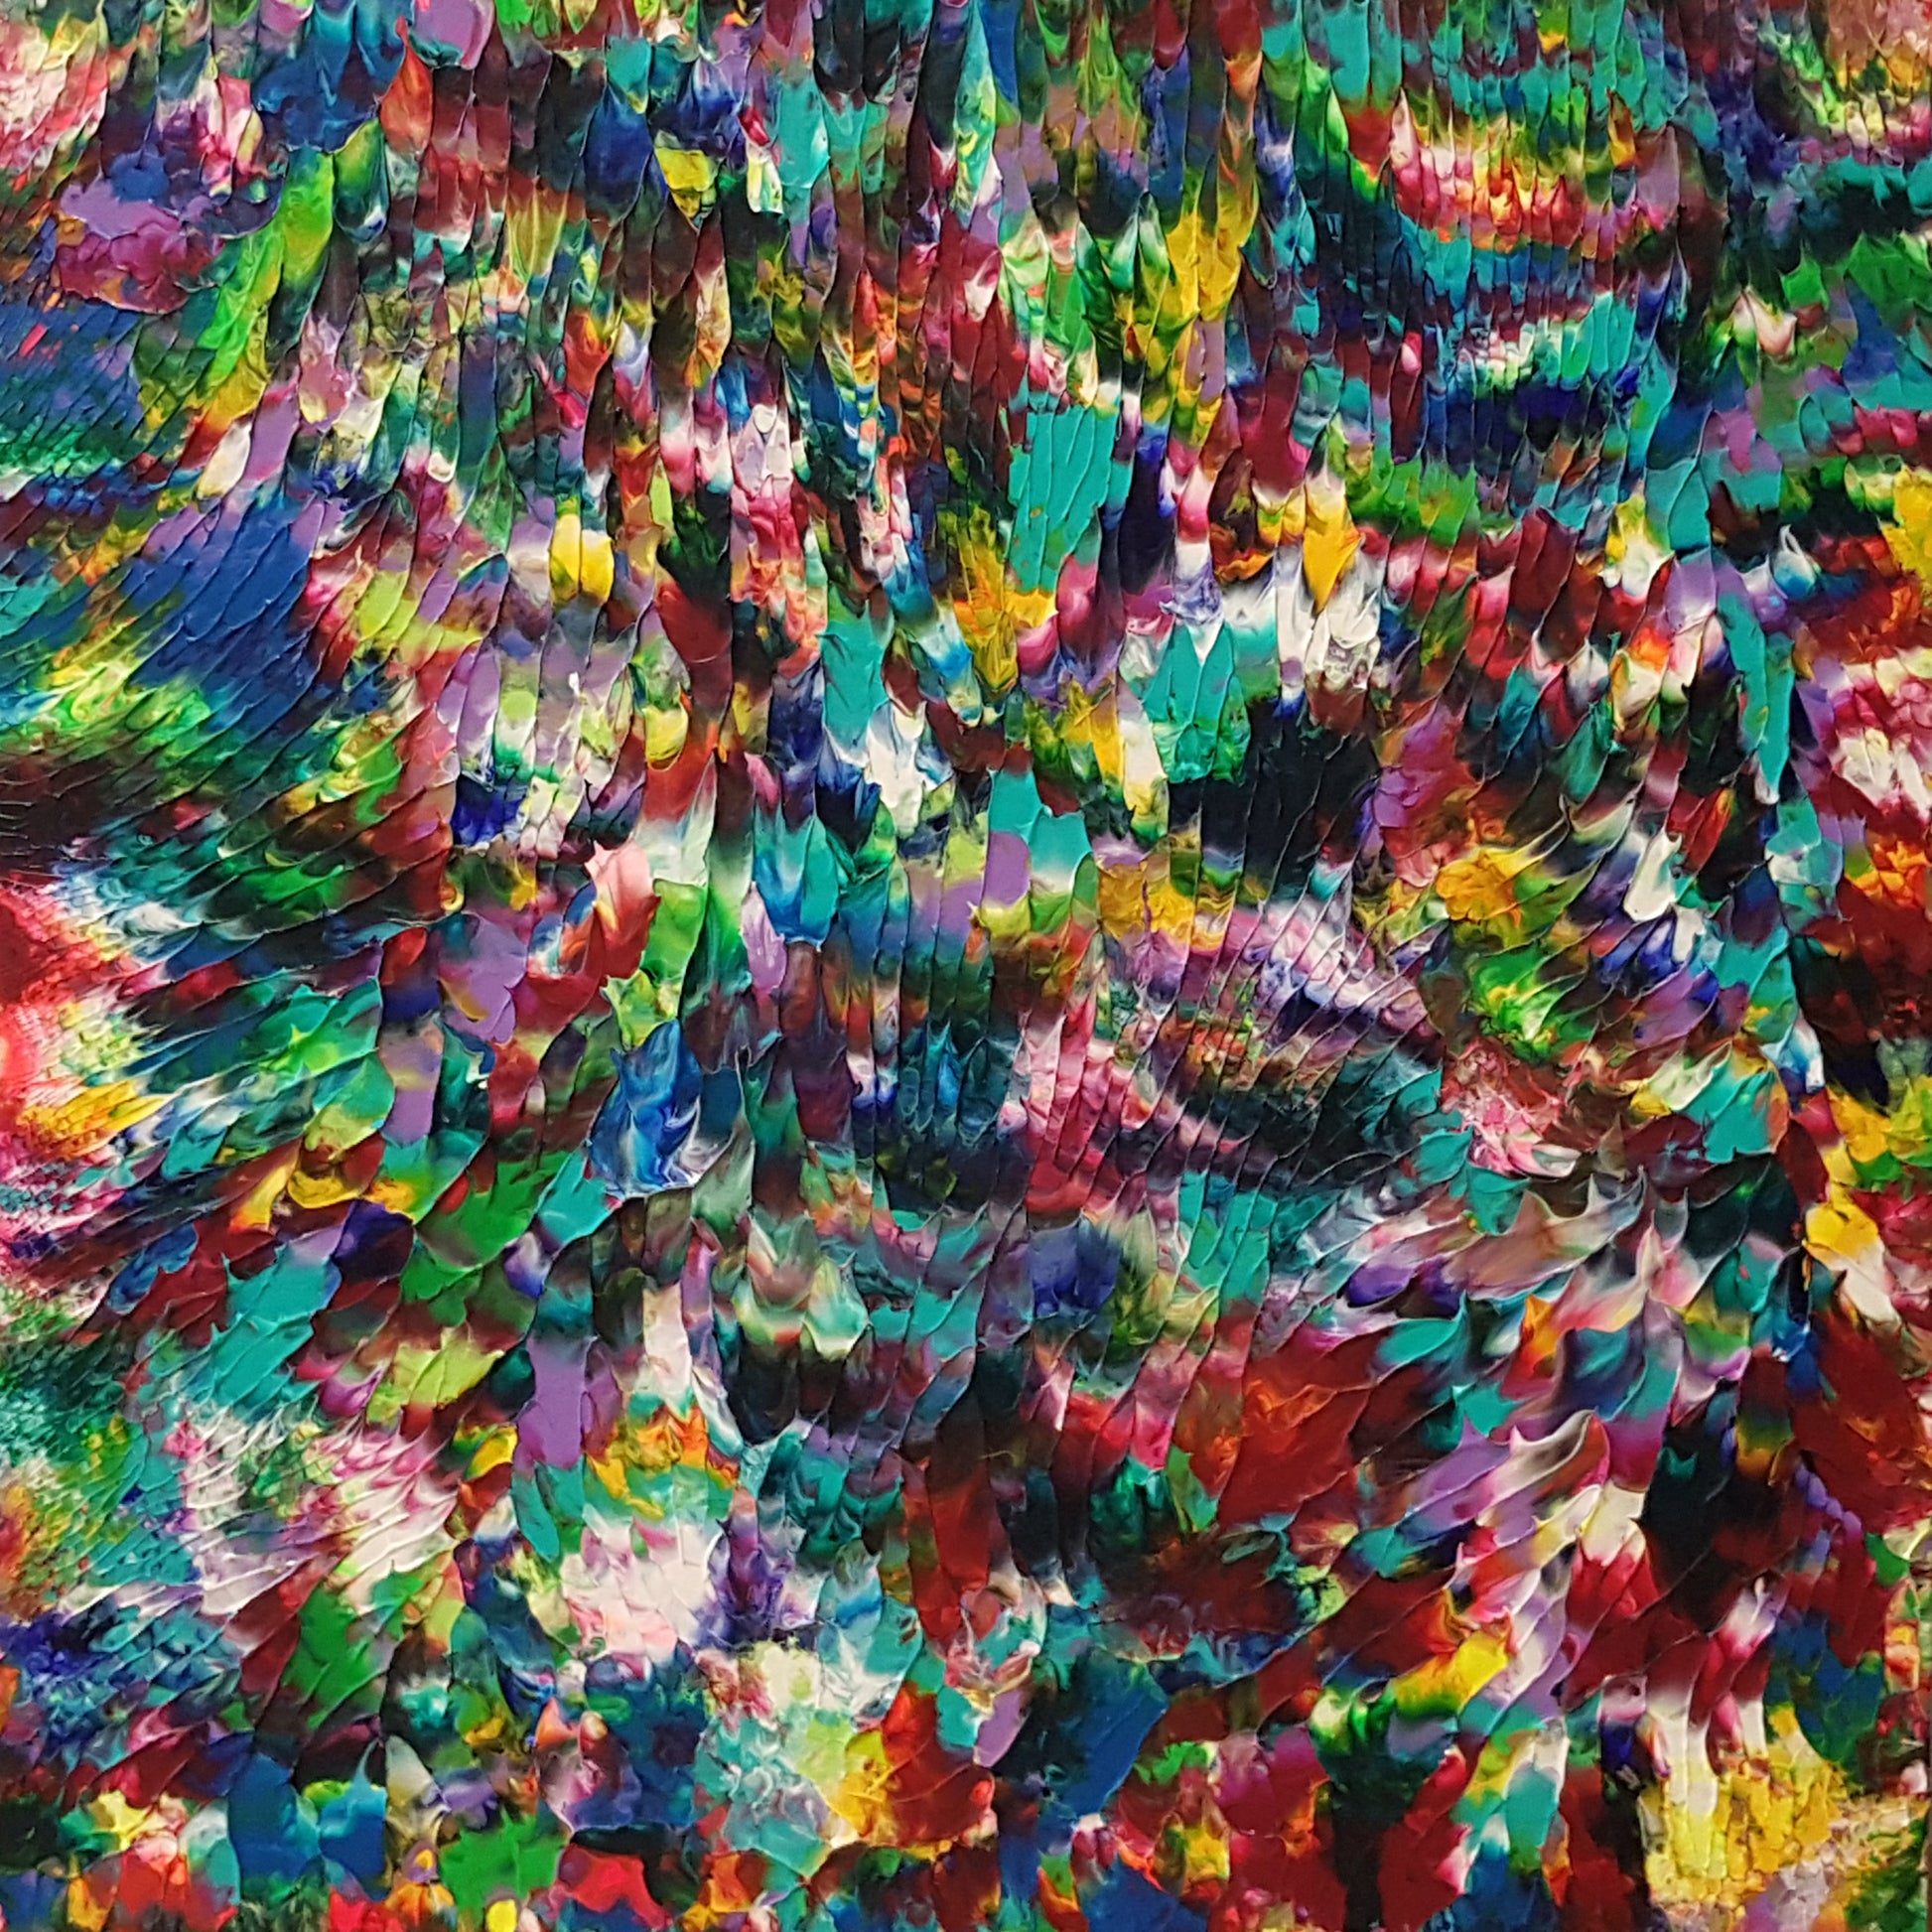 Psychedelic-Wasteland-Alexandra-Romano-Buy-Bold-Textured-Art-Online-Abstracts-Sale-Contemporary-Artworks-Toronto-Artist-Gallery-Shopping